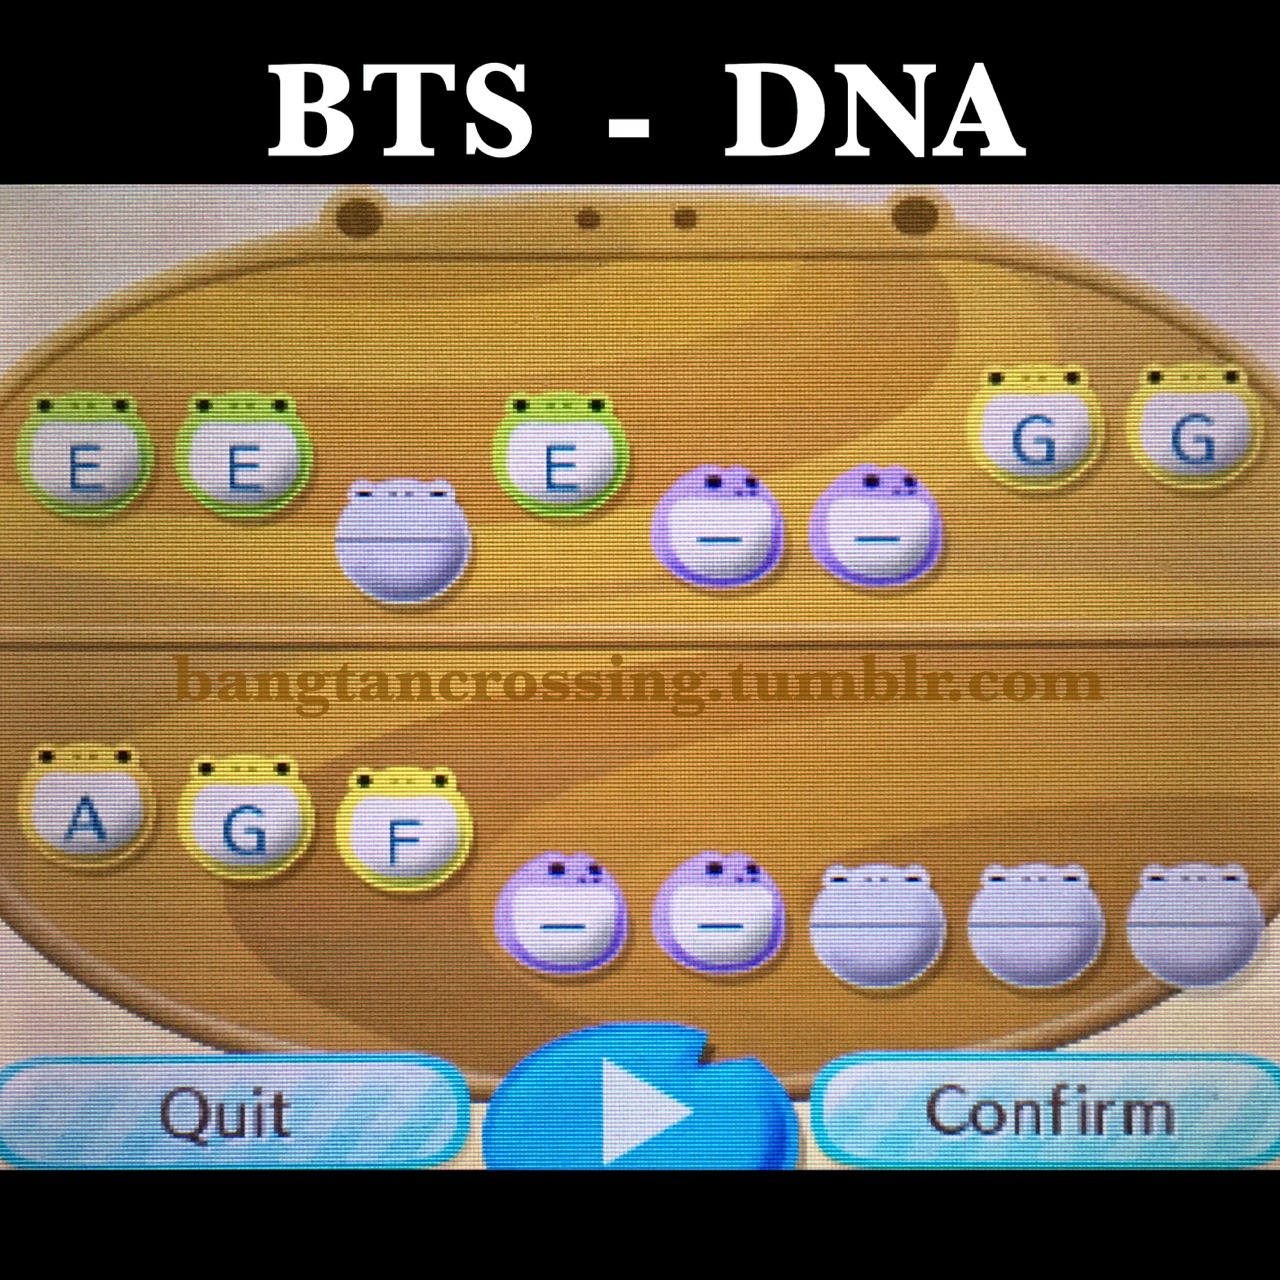 Dna Bts Animal Crossing - music codes for roblox dna bts